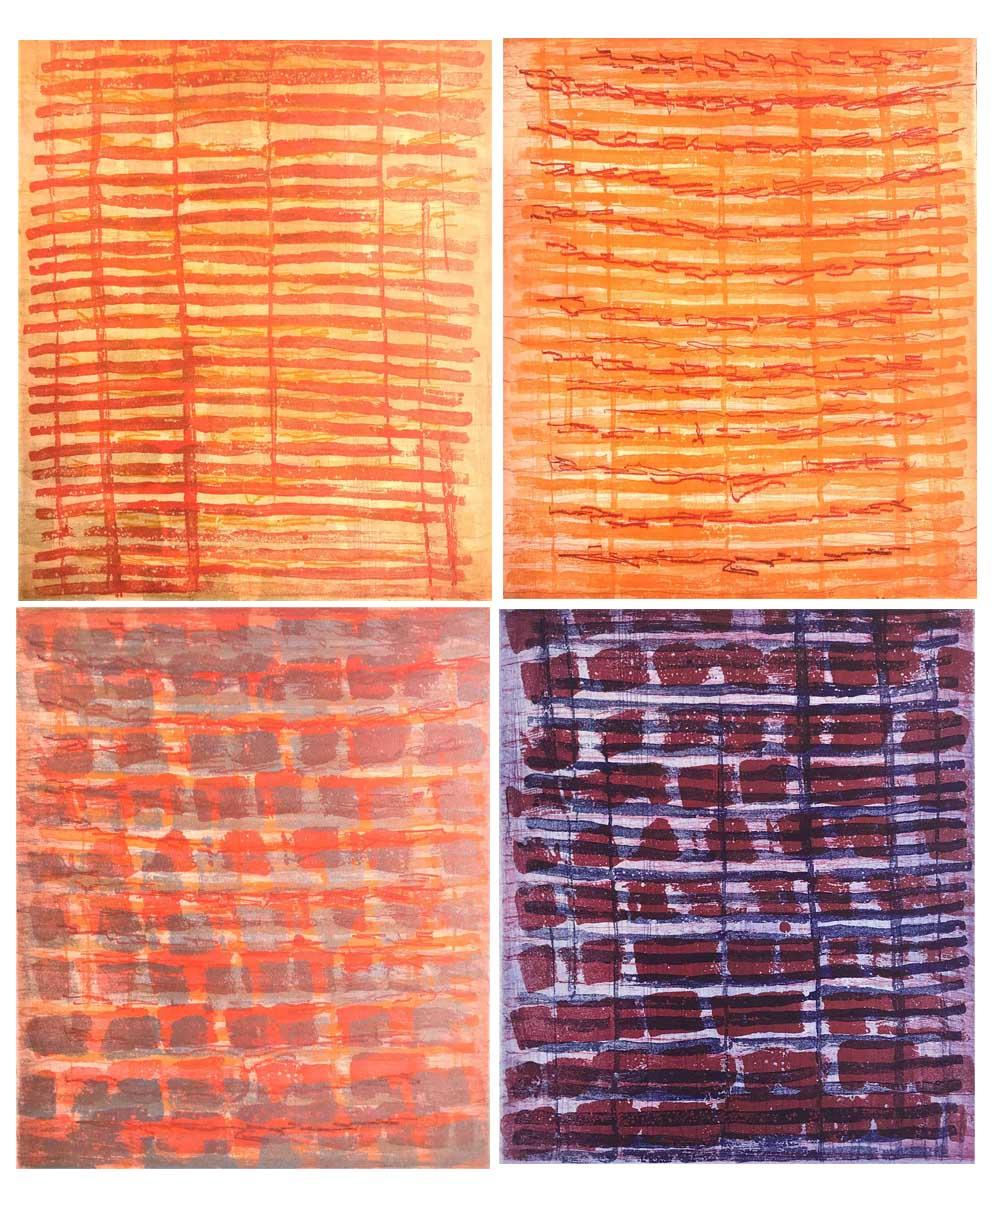 “Rubato 3”, painterly abstract aquatint monoprint, bright orange, red, violet. - Print by Emily Berger